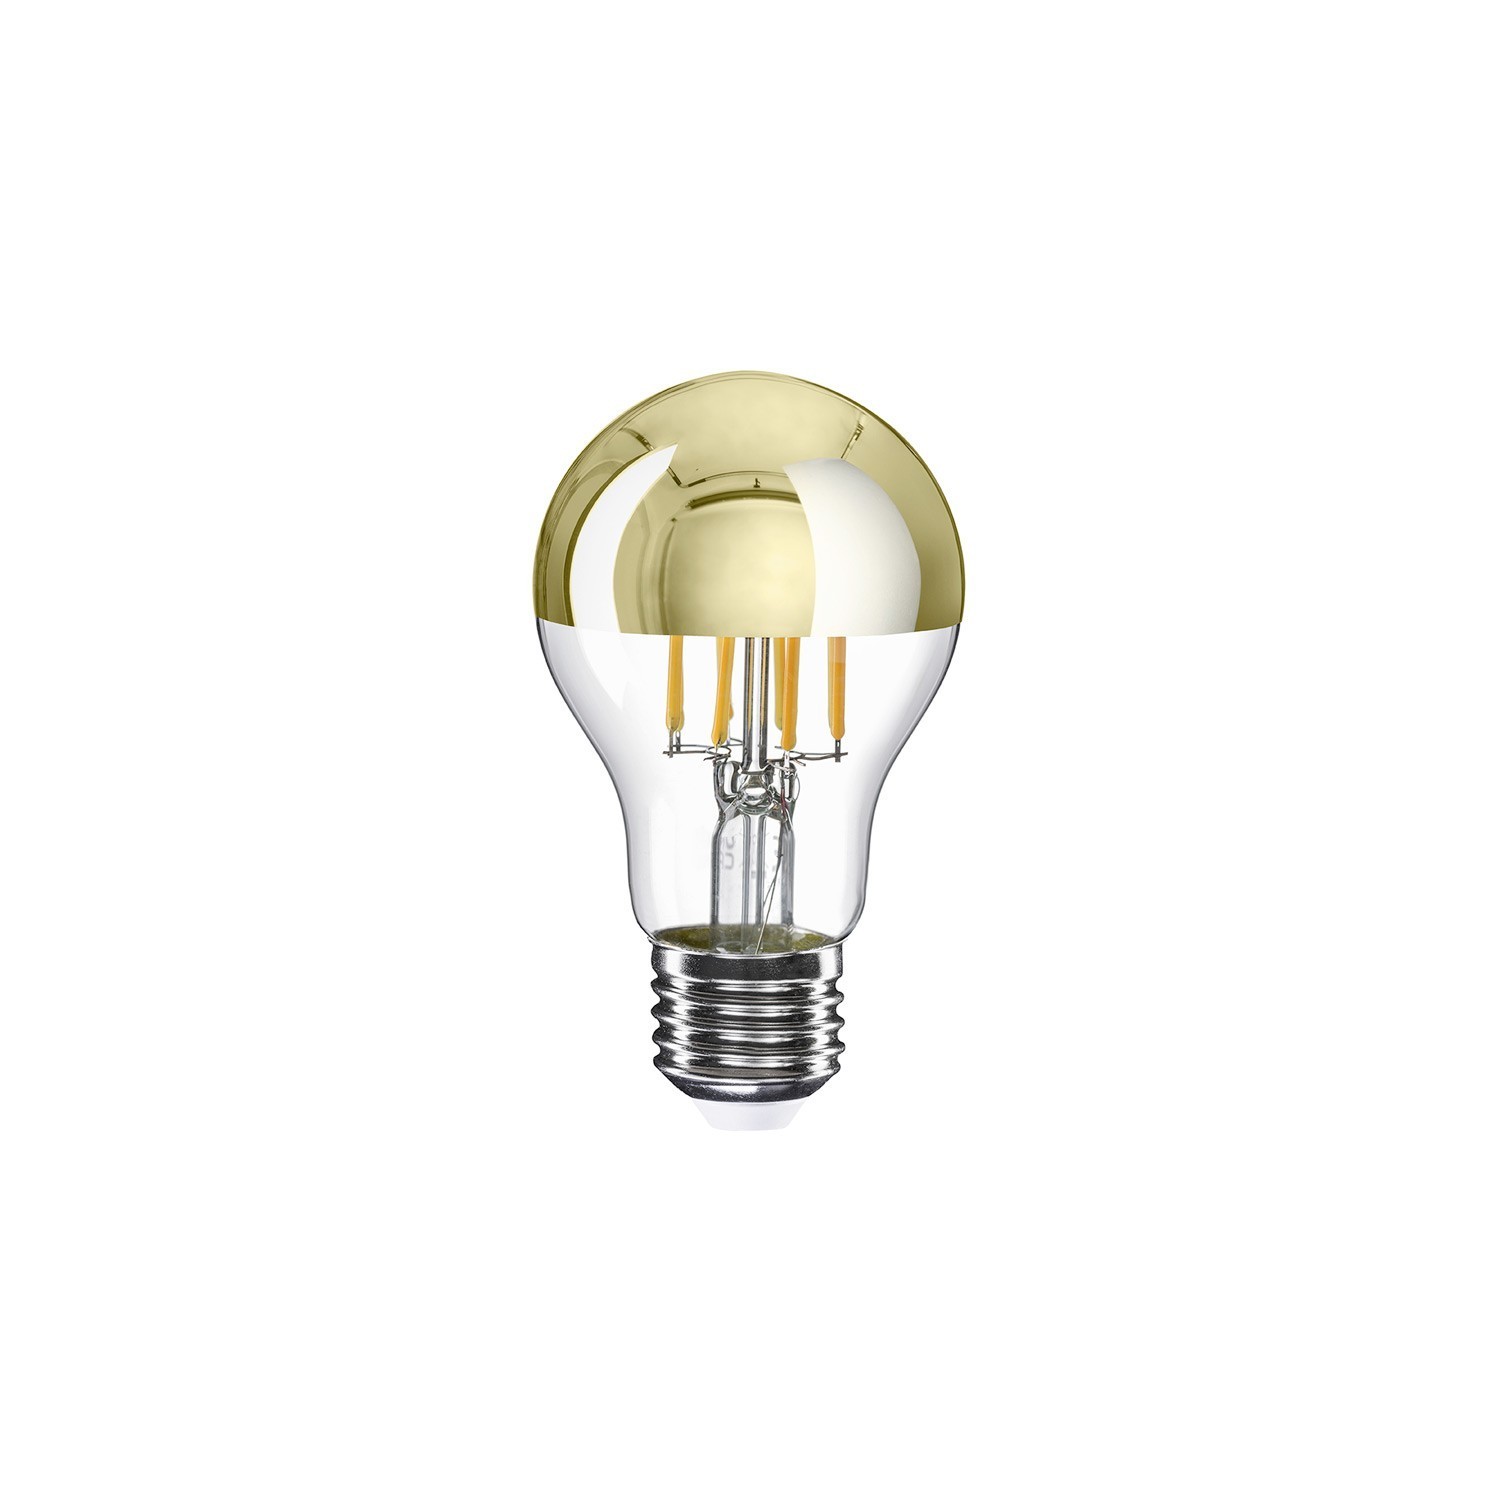 LED Gold Half Sphere Drop Light Bulb A60 7W 650Lm E27 2700K Dimmable - A12